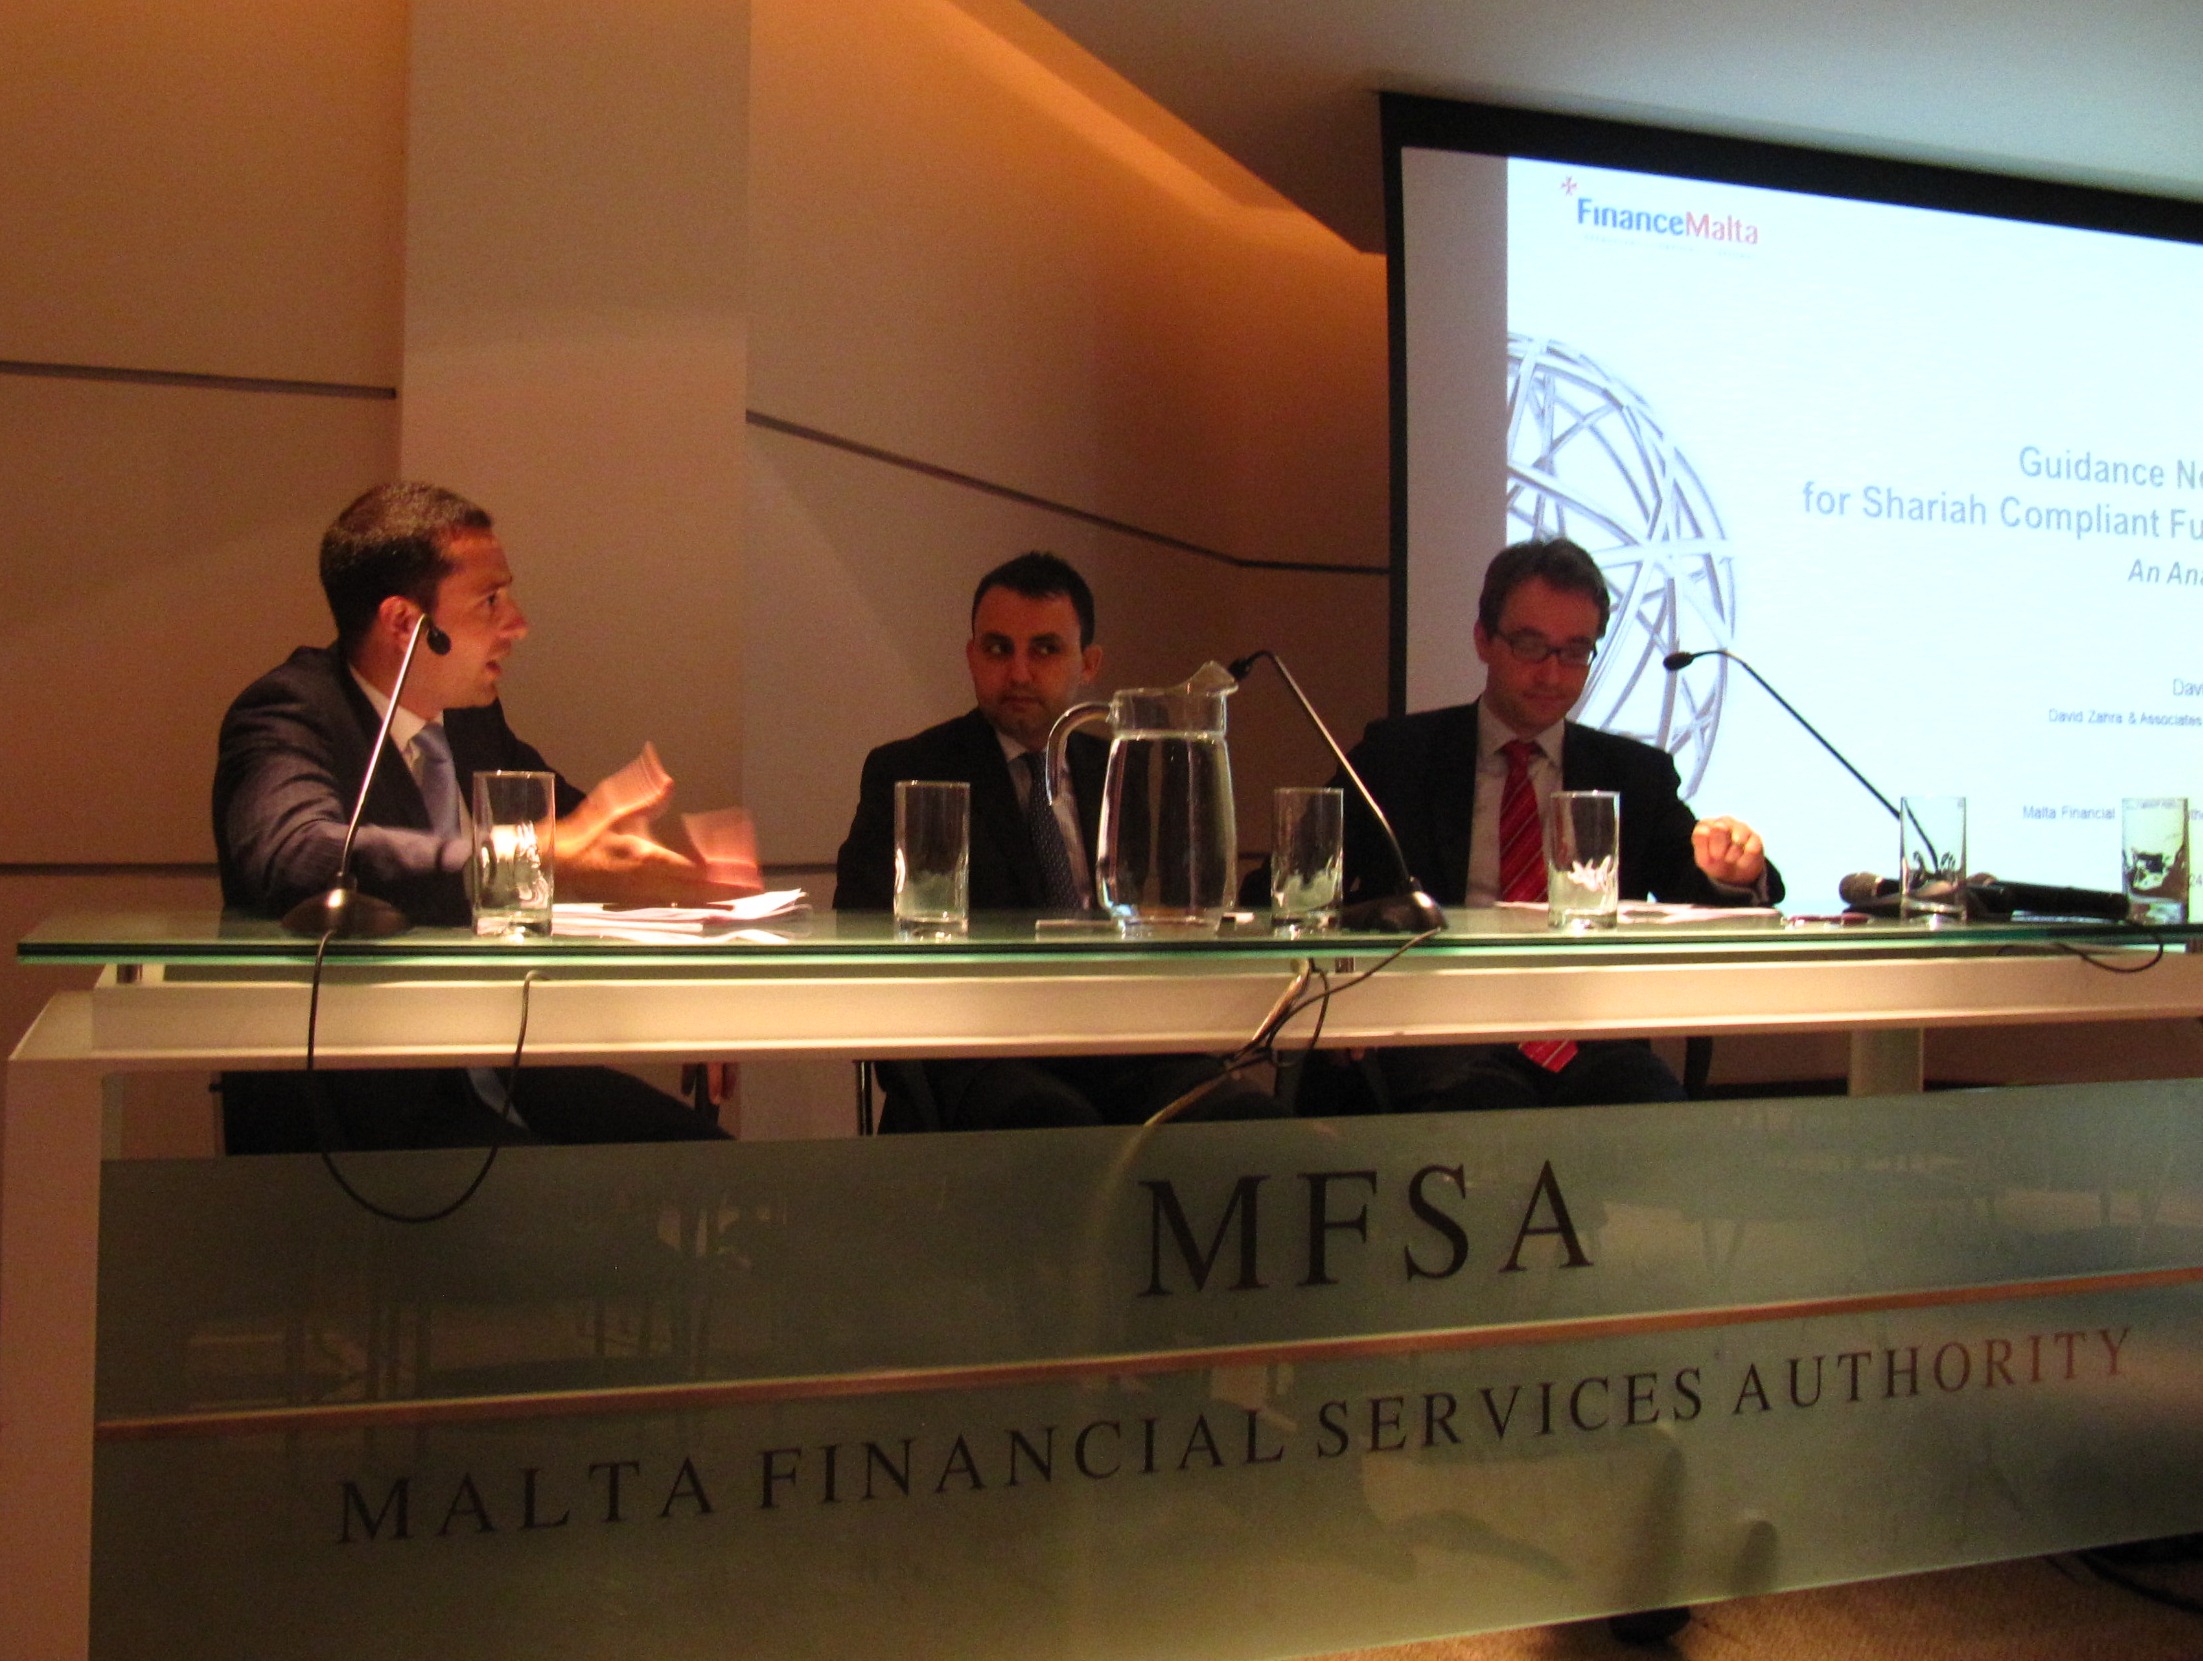 Malta: an ideal match for Sharia-compliant investments